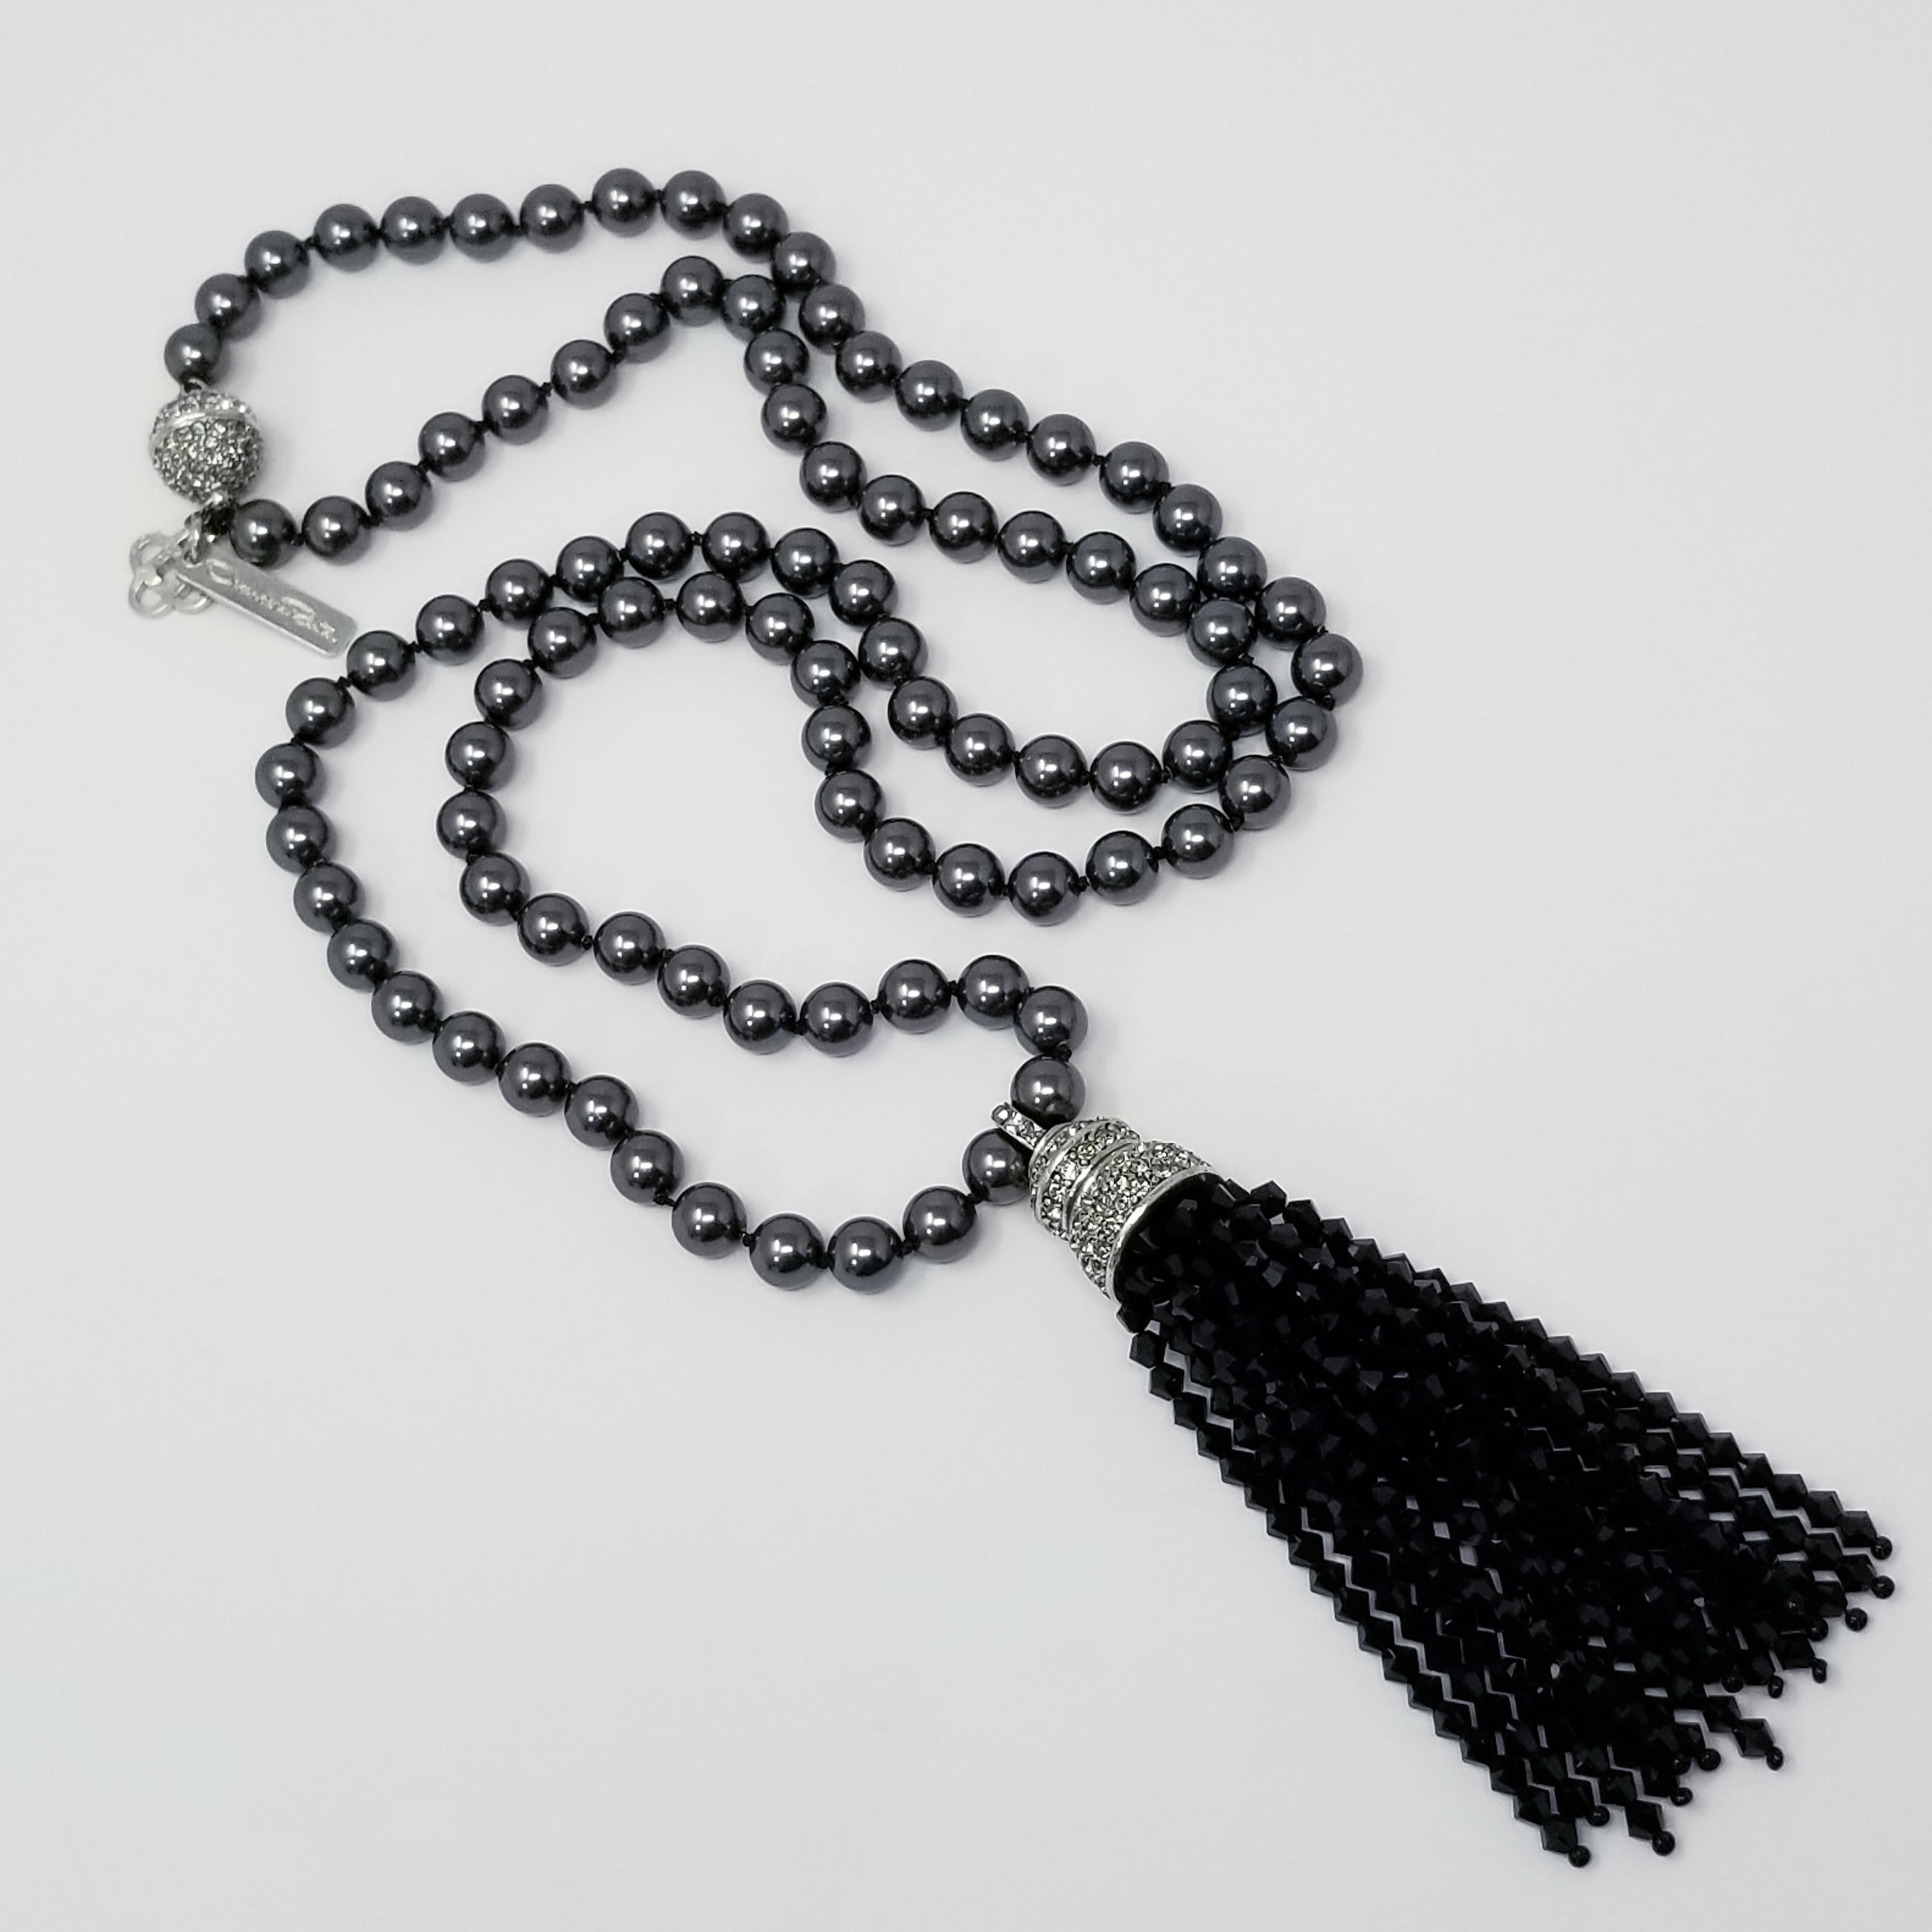 A chic bead necklace, featuring dark gray, metallic, reflective beads on a knotted string. The tassel features a rhodium plated metal motif, encrusted with clear crystals and hanging black faceted crystal strands. Pave crystal ball closure. Radiates